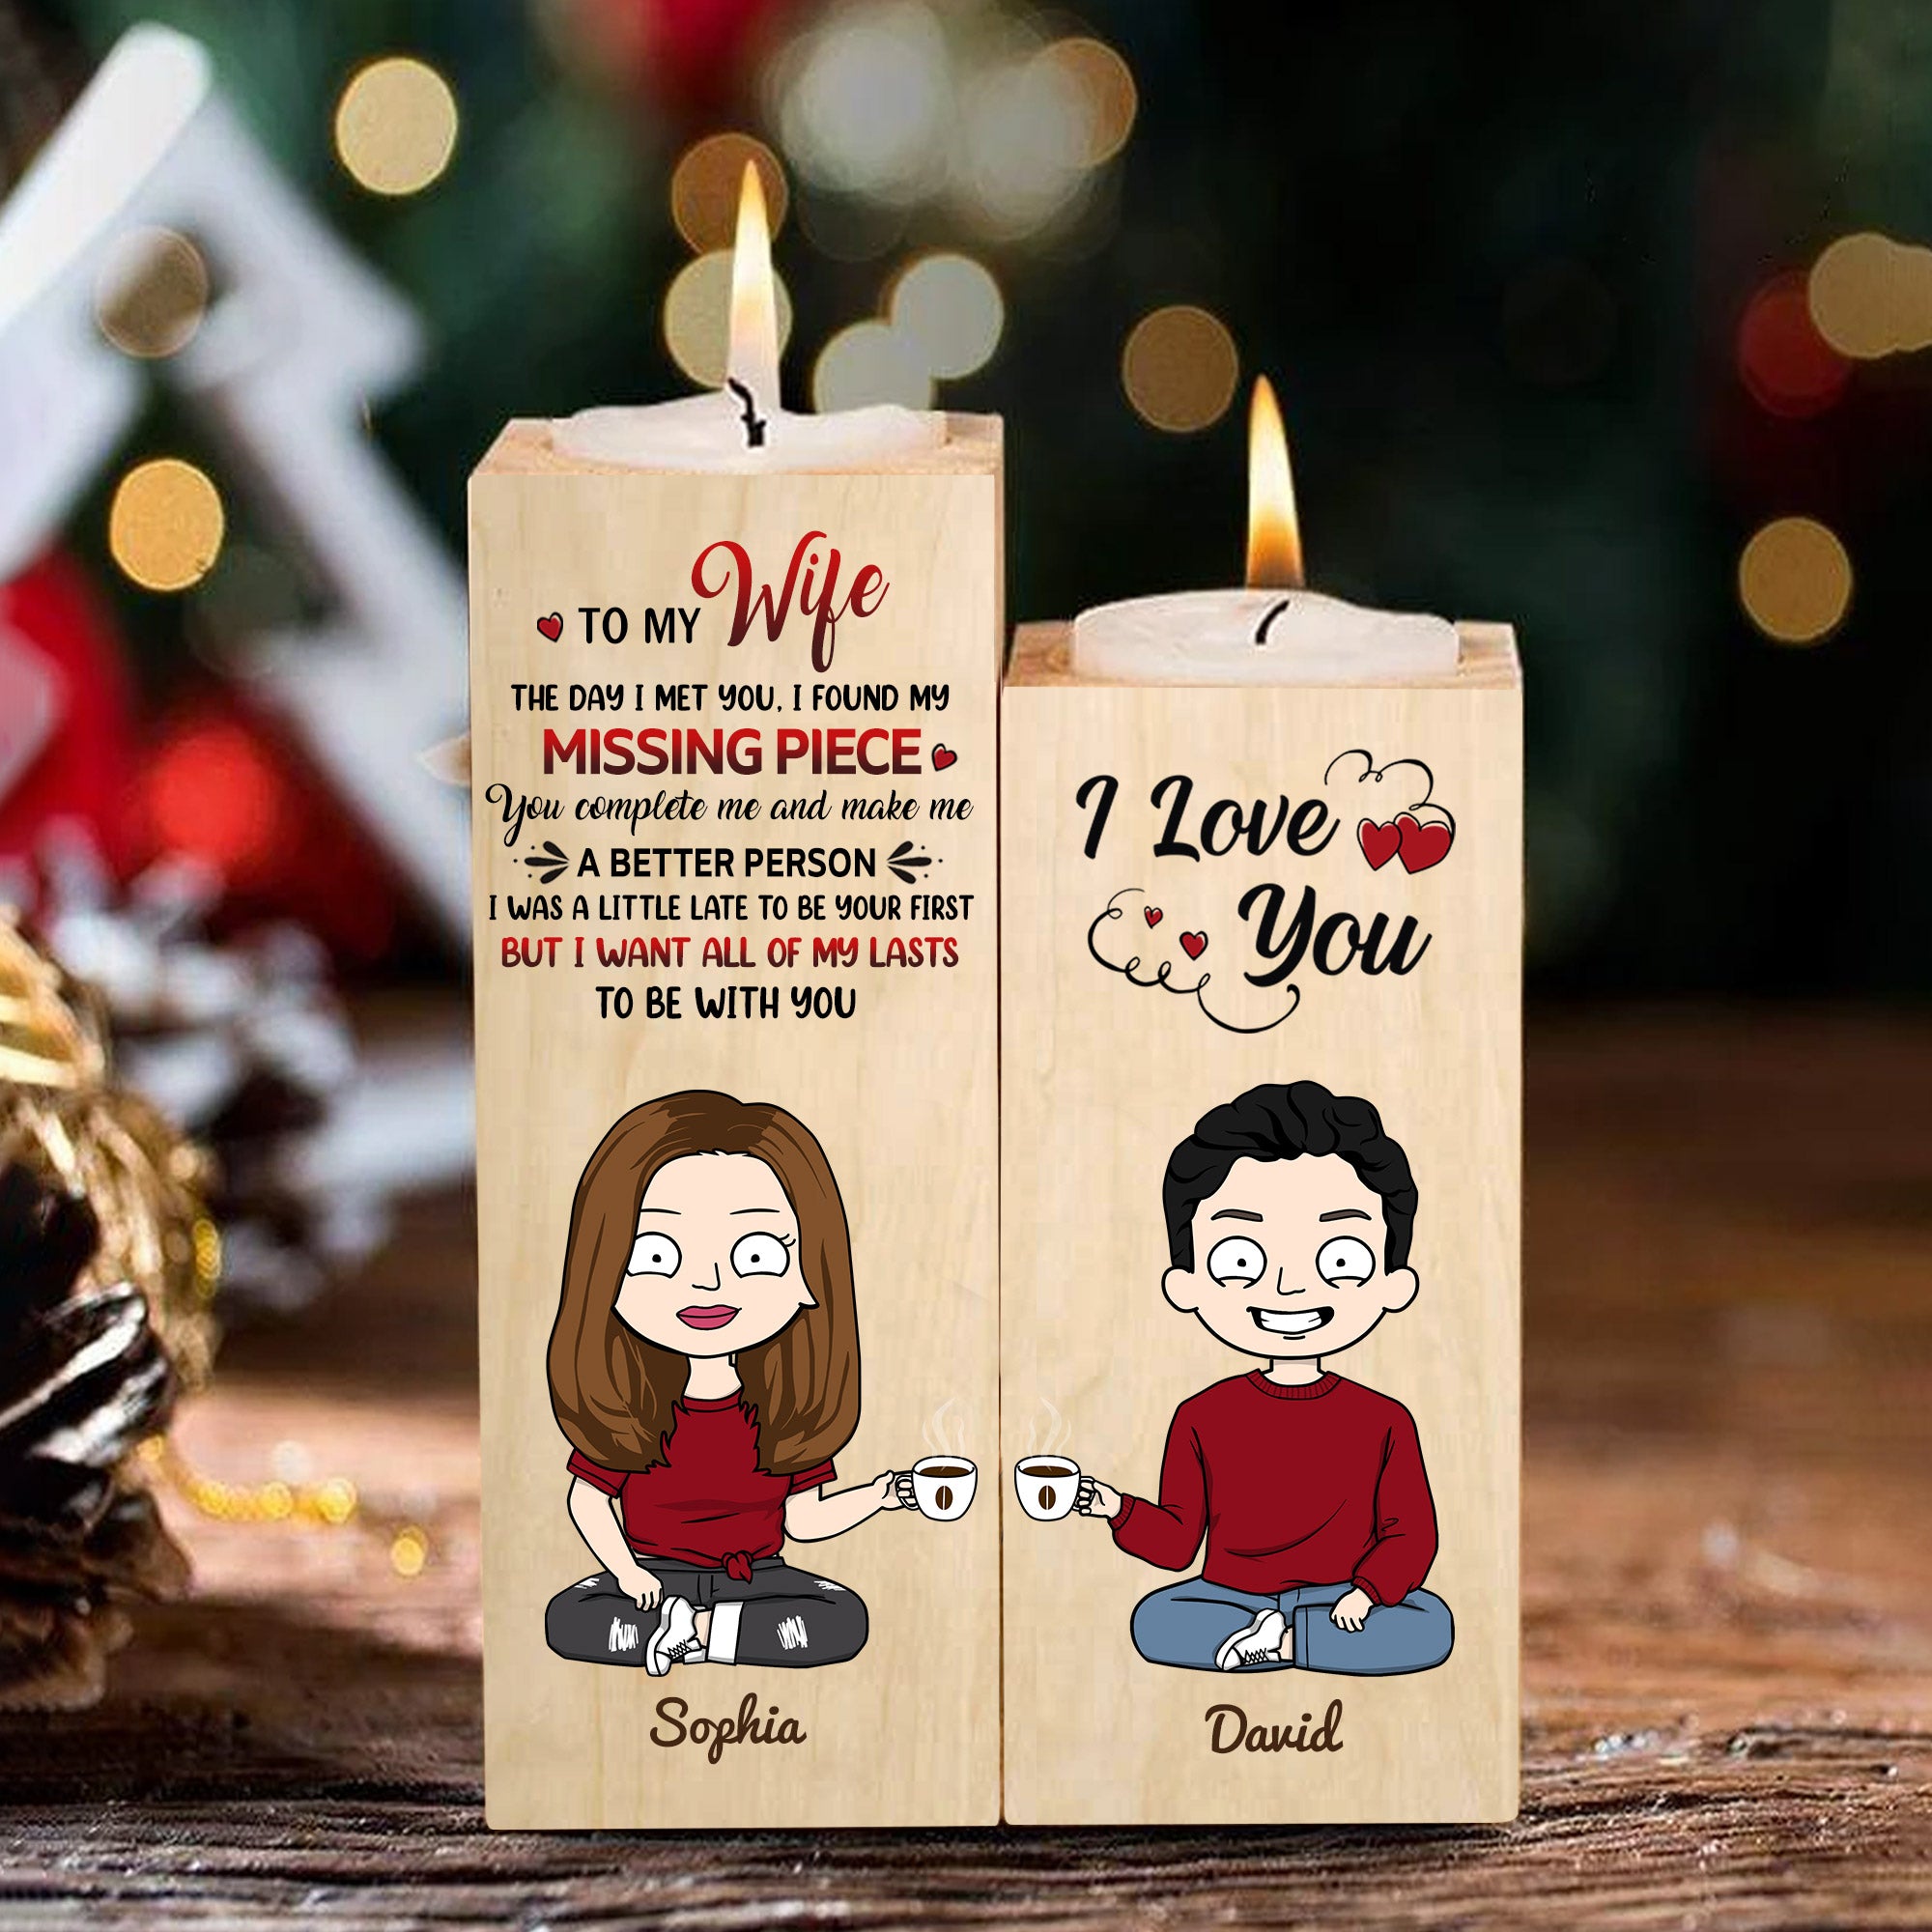 Personalized Candle Holder For Couples, The Day I Met You, I Found My Missing Piece, Names & Characters can be changed, HG98, LIHD